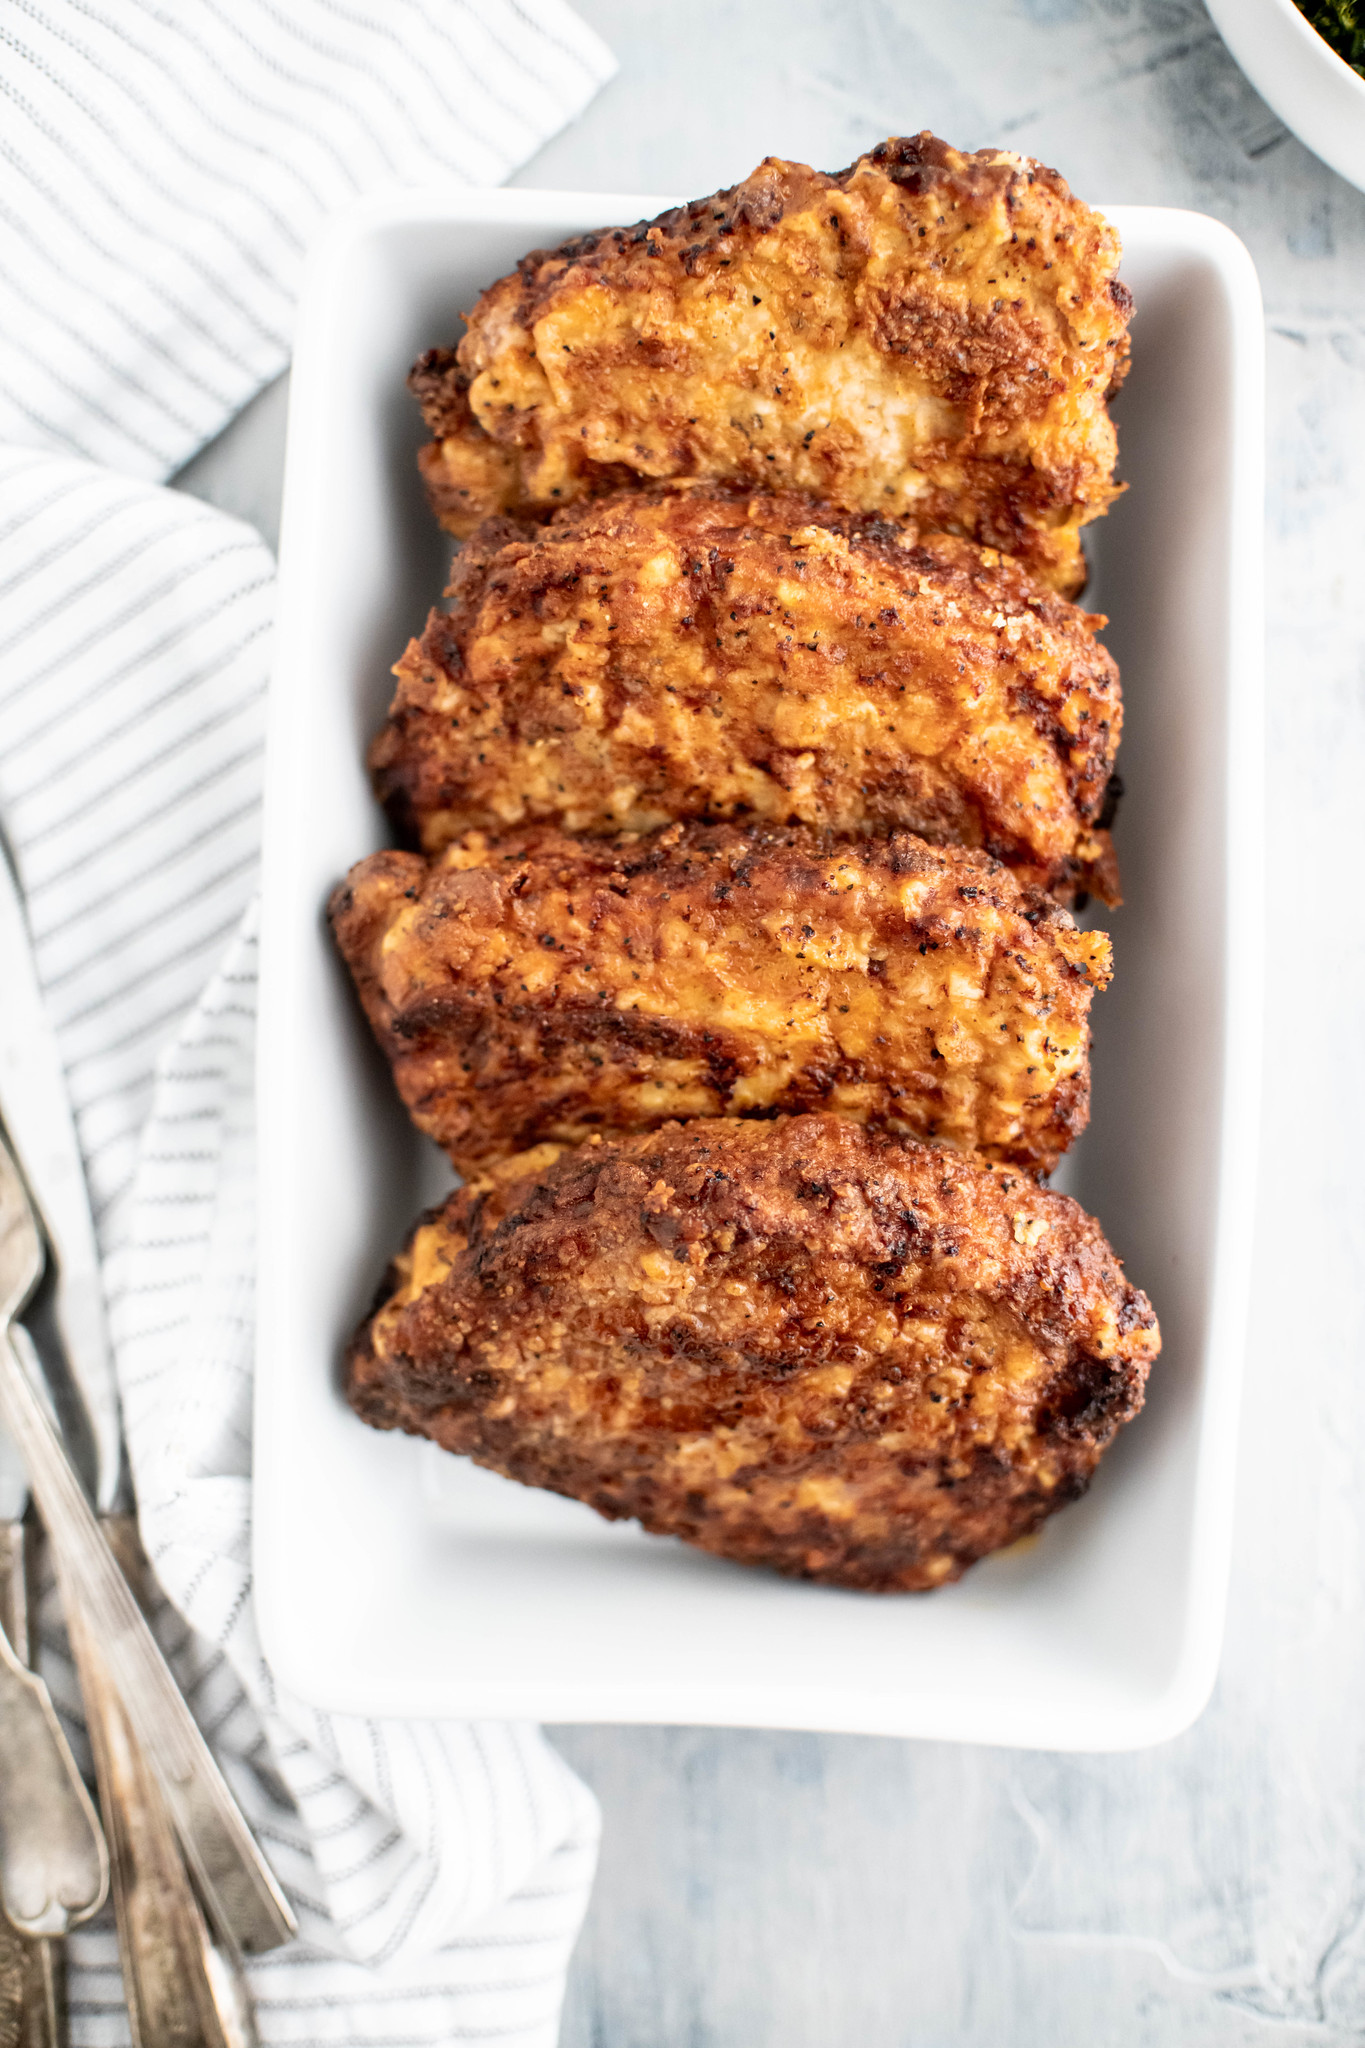 Four fried pork chops lined up in a white rectangular dish.